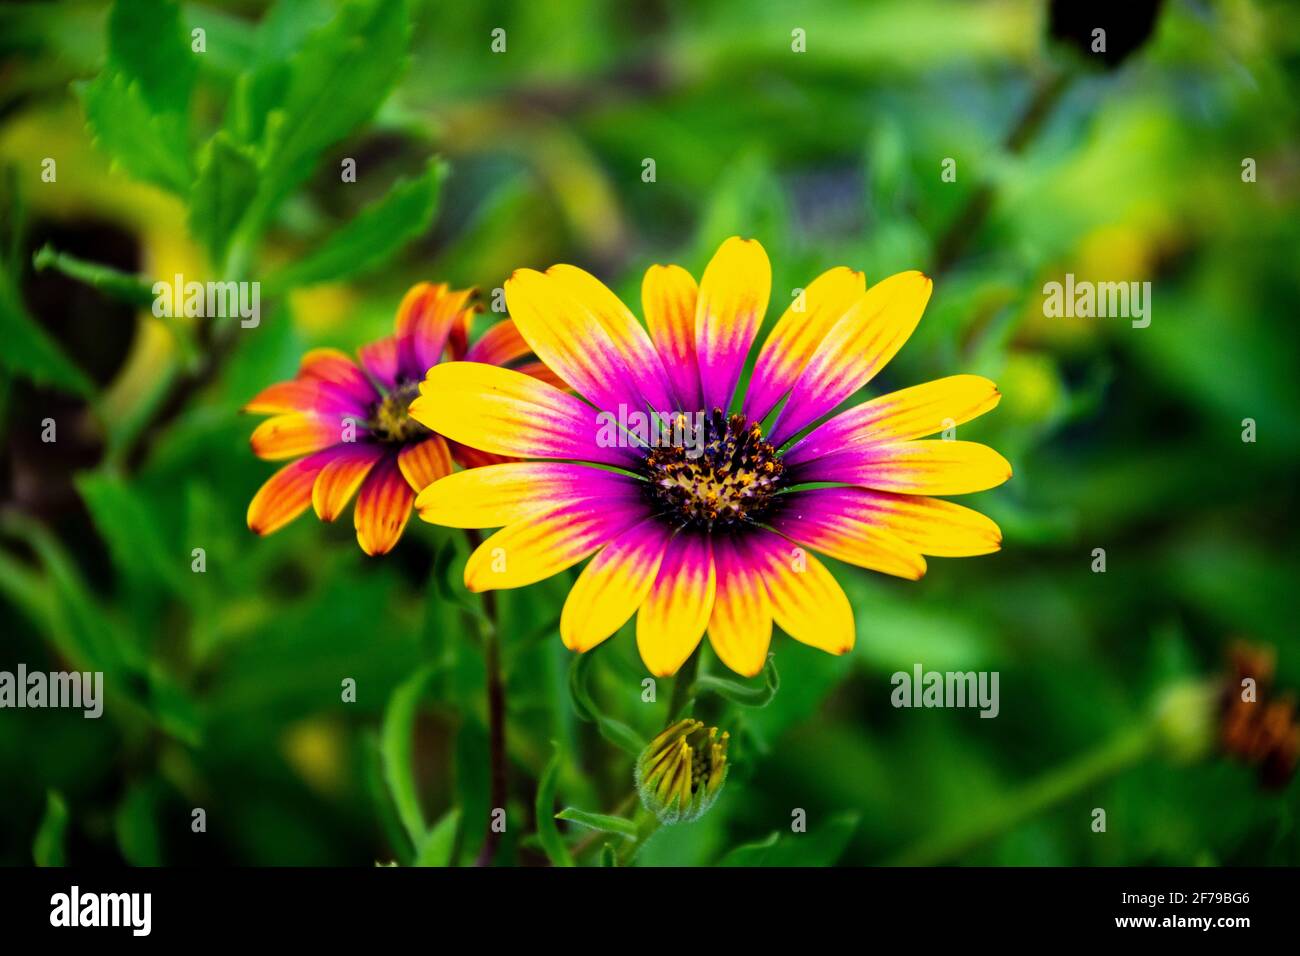 Delosperma or Ice plant flower with a pink interior and yellow petal edges Stock Photo